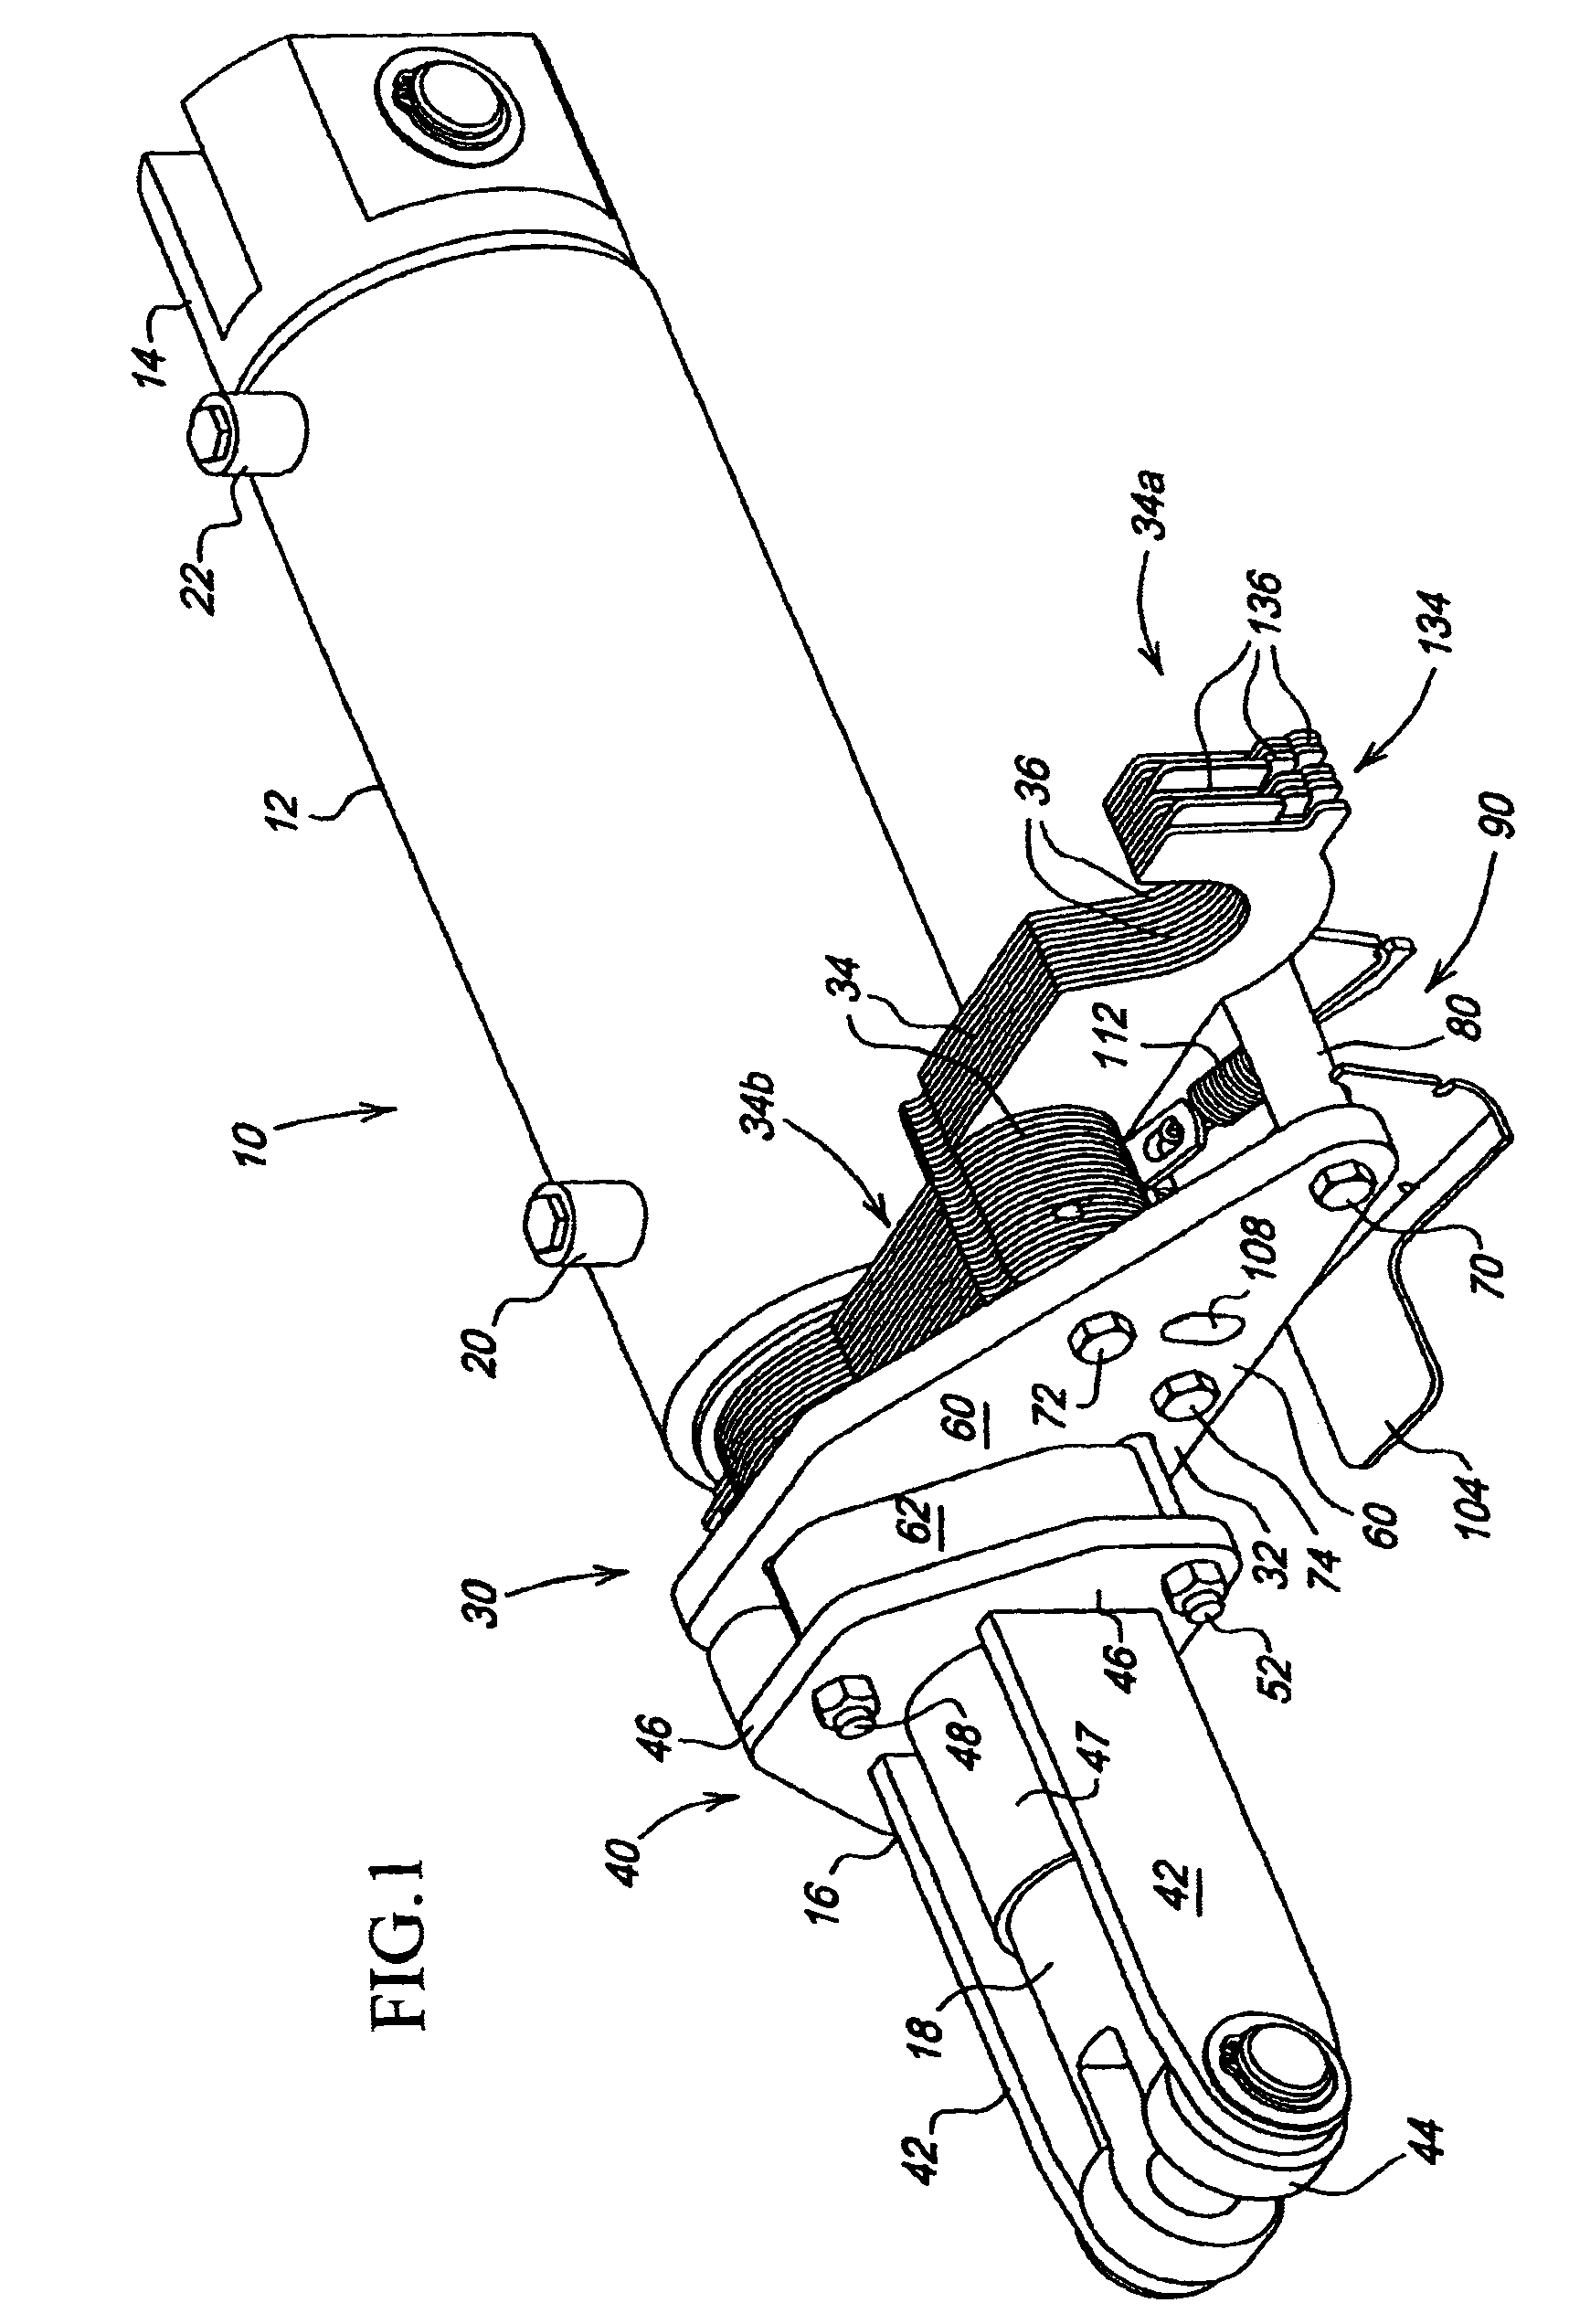 Cylinder mounted stroke control